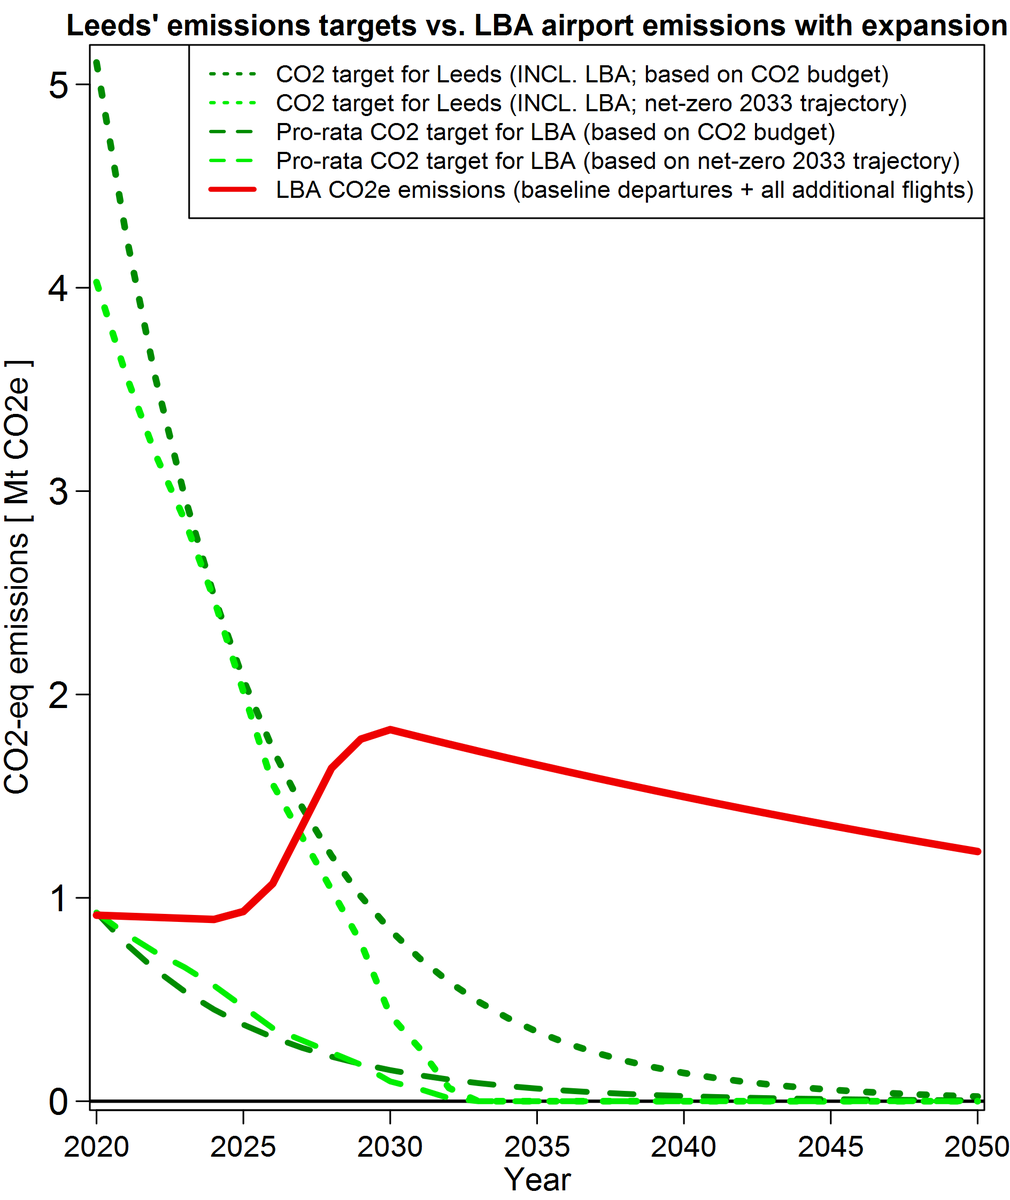 6/ How do LBA emissions in case of expansion (red curve) fit with those CO2 targets? They don’t. While the targets require that LBA emissions DECREASE rapidly, expansion would see LBA emissions INCREASE steeply and vastly exceed the CO2 allowance for the whole of Leeds incl. LBA.